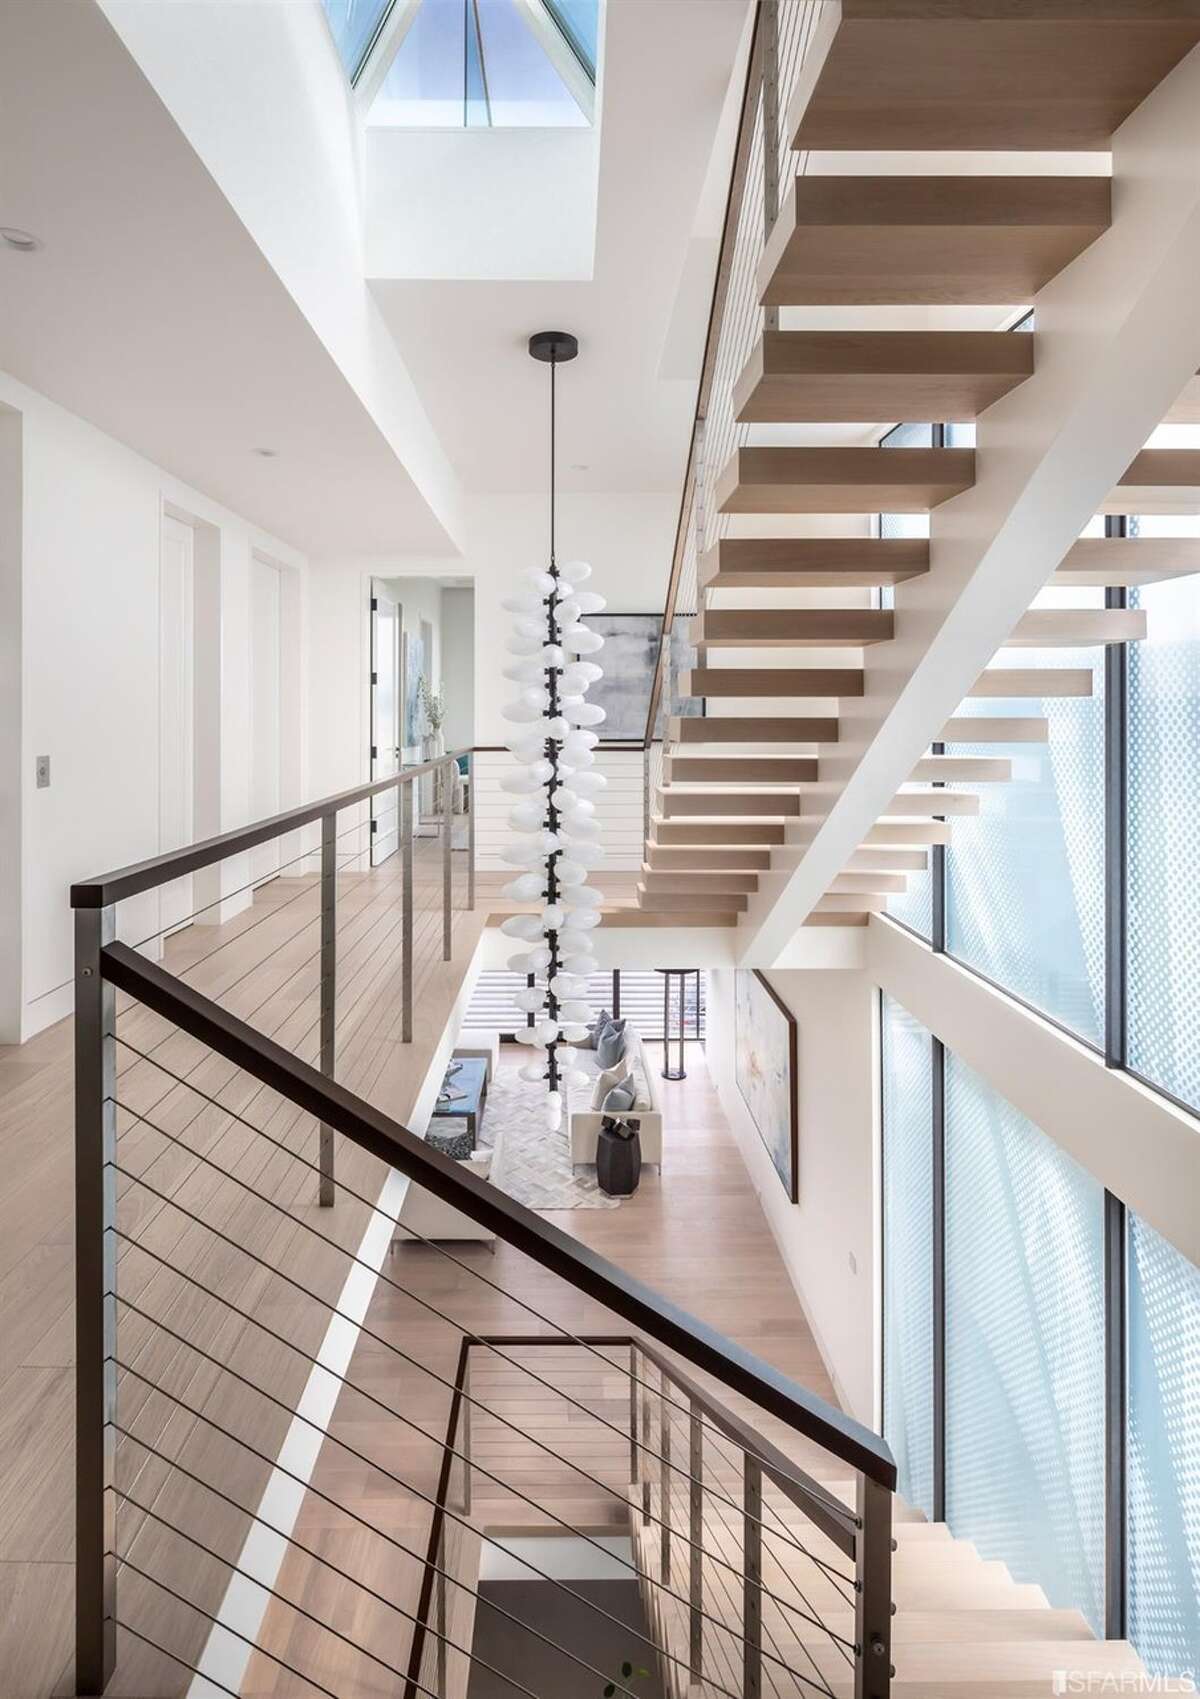 The floors are connected via this light-filled stairway, though the home also has an elevator. But given that the five-bedroom, 7.5-bath property has over 7,000 square feet, it's remarkable that it only has three levels of indoor space, said Moshayedi. "Most comparable homes in the city are much more vertical in the design, while this home has very large floor plates on each level due to the lot size," she explained. 